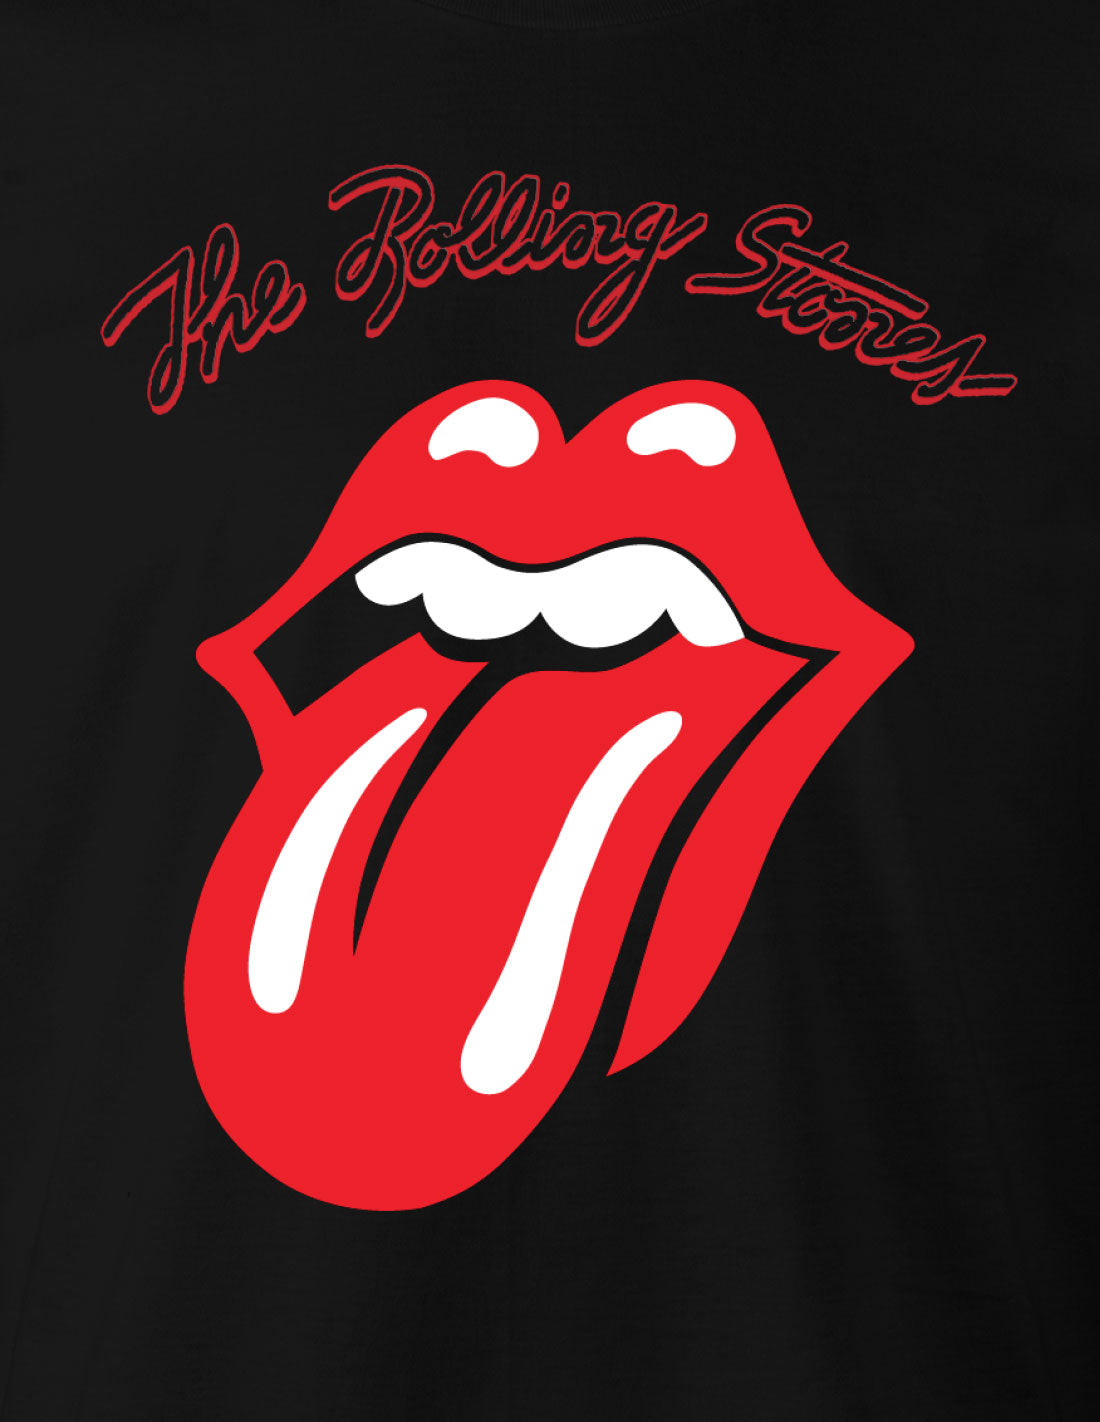 The Rolling Stones Tee - Tongue